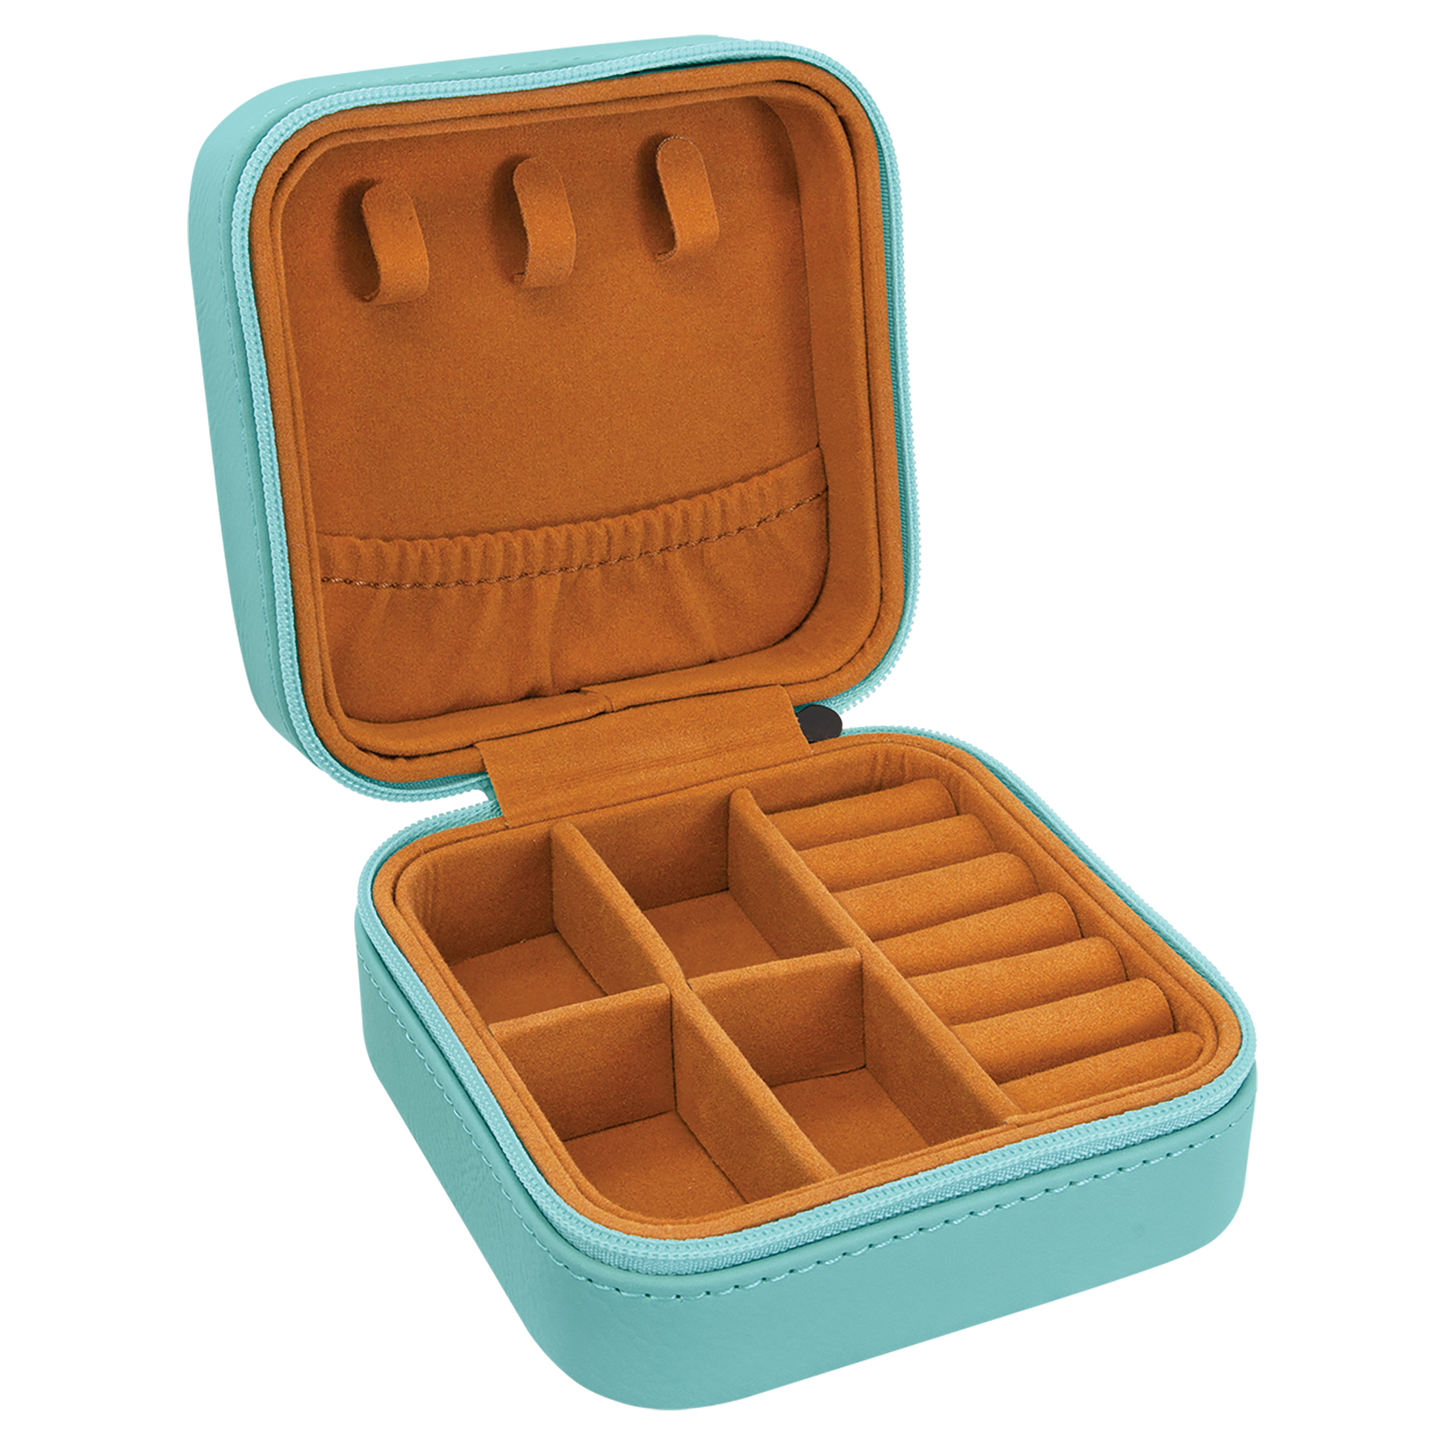 Perfectly Exactly As You Are Travel Jewelry Box - Teal